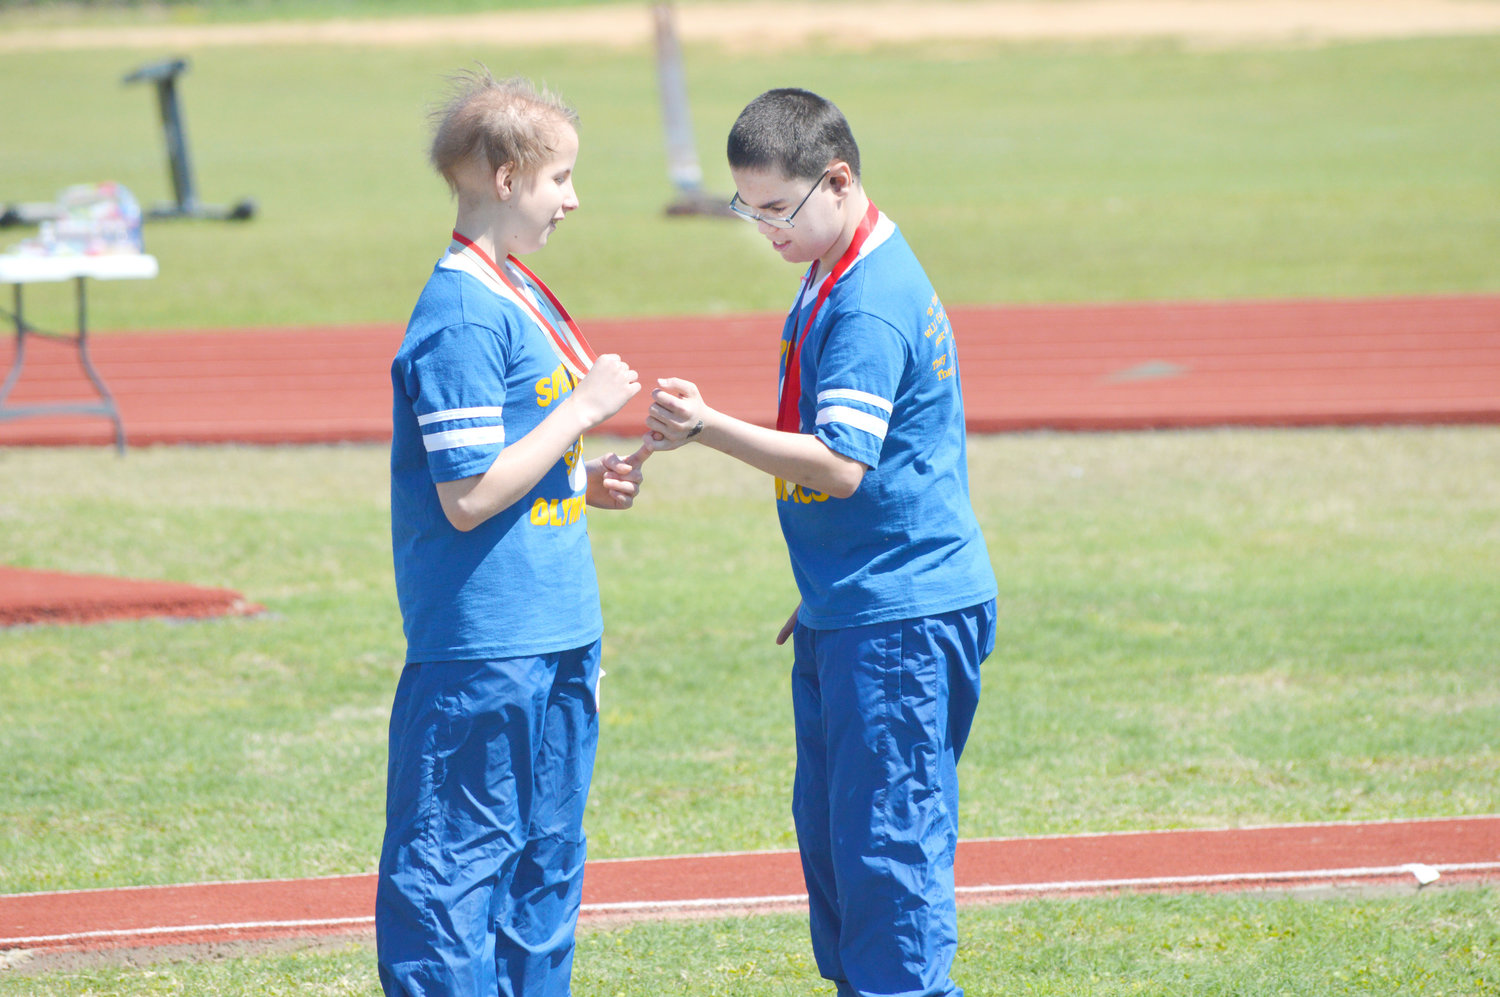 Teammates from Sulphur Springs congratulate each other on a job well done in the softball throw at Friday’s Special Olympics held at Quitman High School.